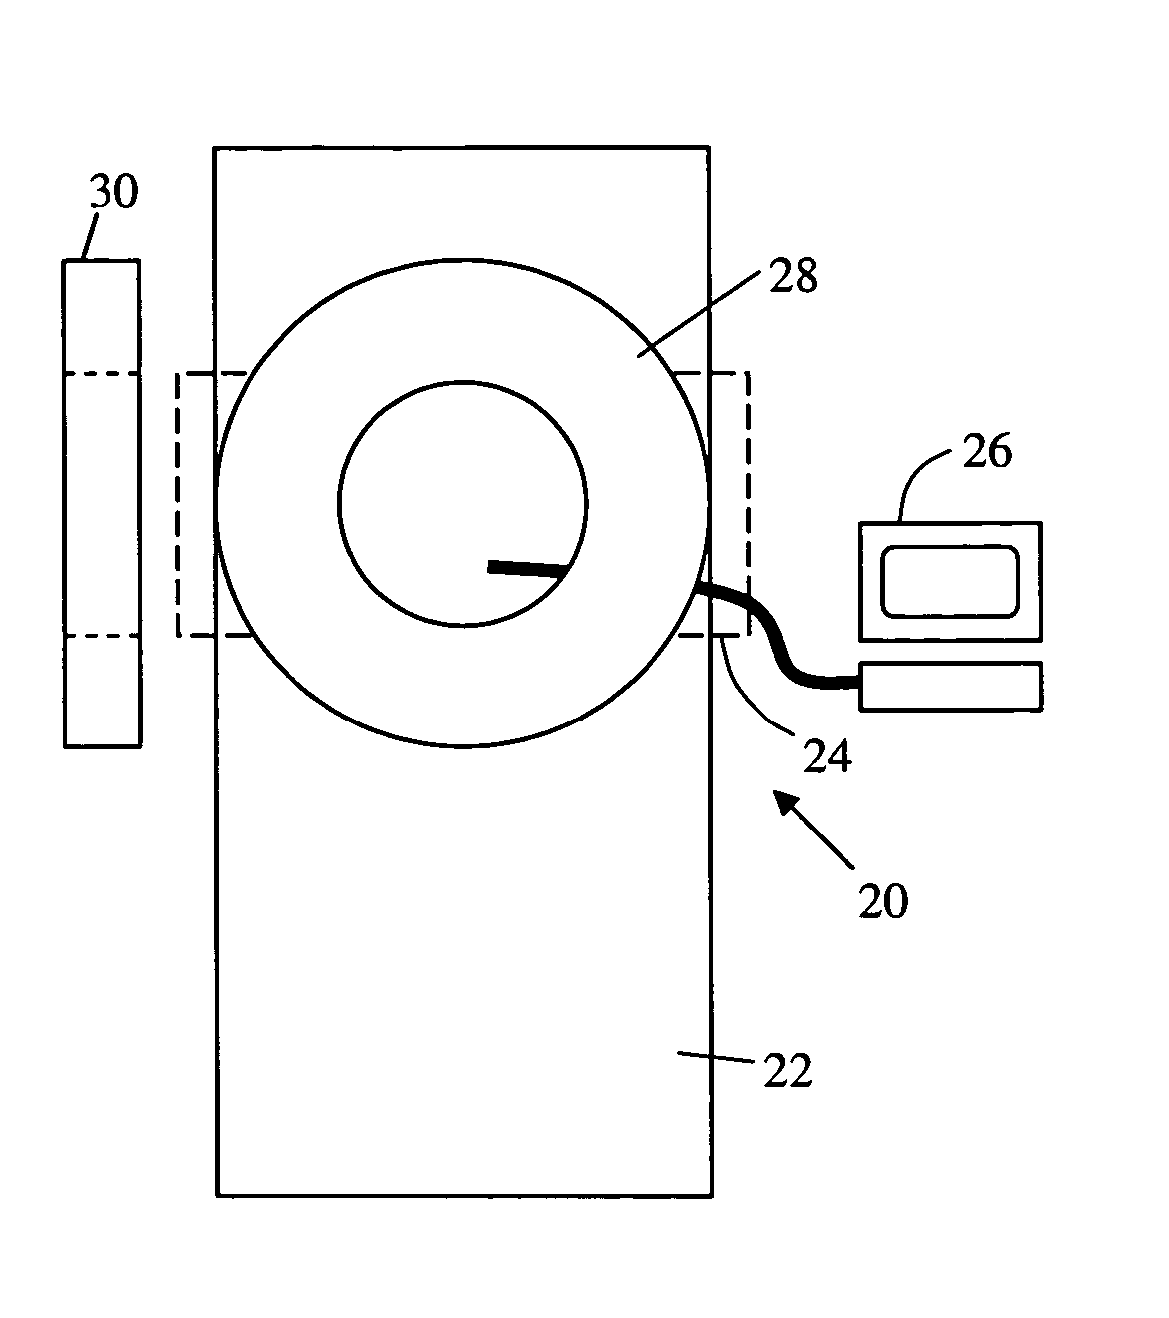 Magnetic resonance imaging and magnetic navigation systems and methods